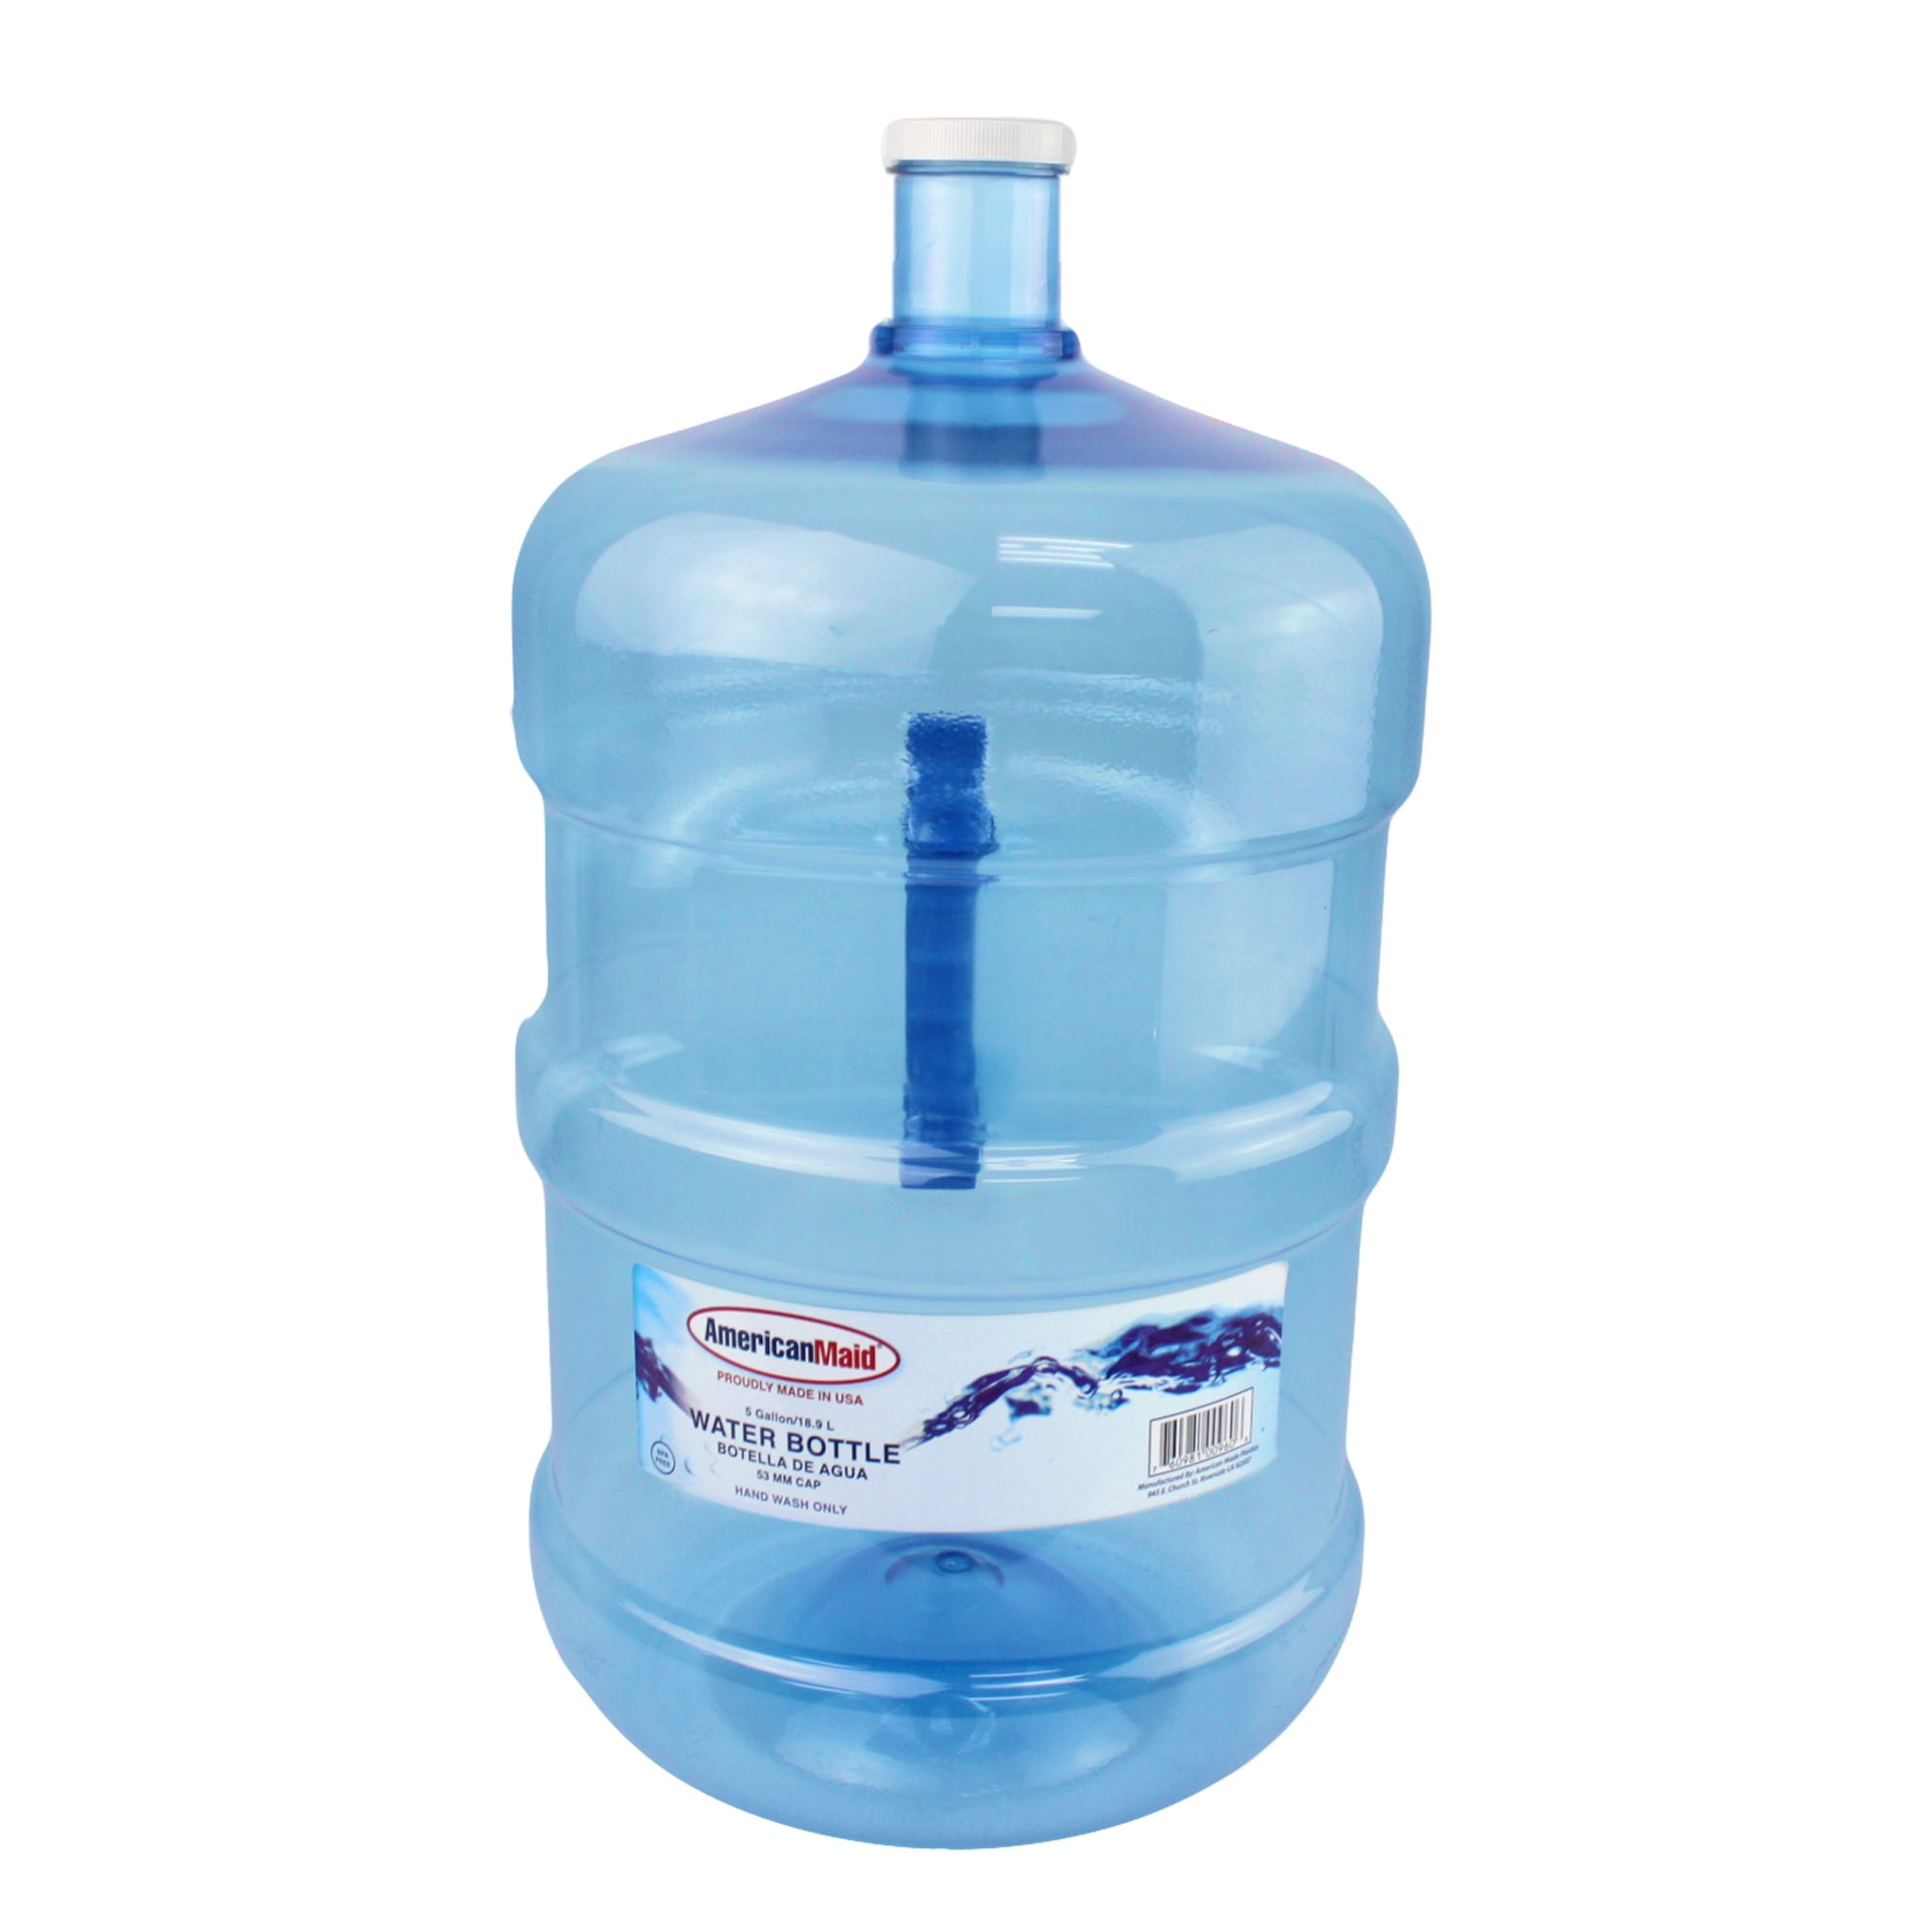 Large Capacity Bottled Water Carry Handle Tool Easy To Carry 5 Gallons Water A7 